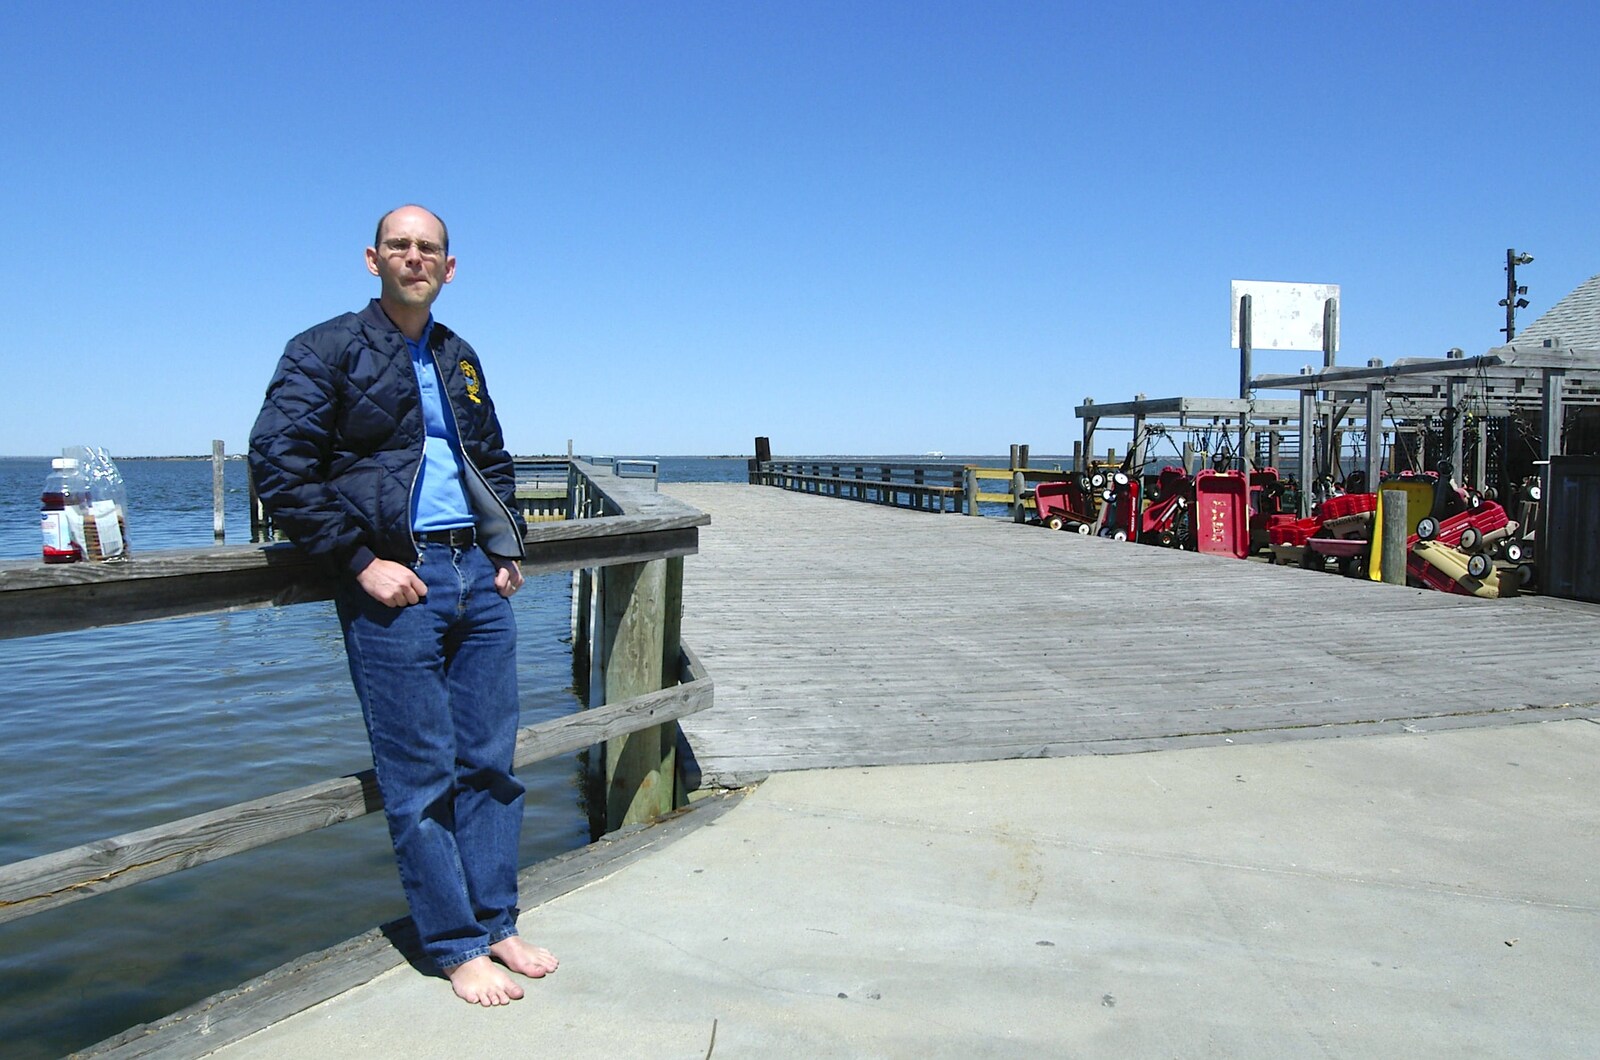 Phil on the pier from Phil and the Fair Harbor Fire Engine, Fire Island, New York State, US - 30th April 2006